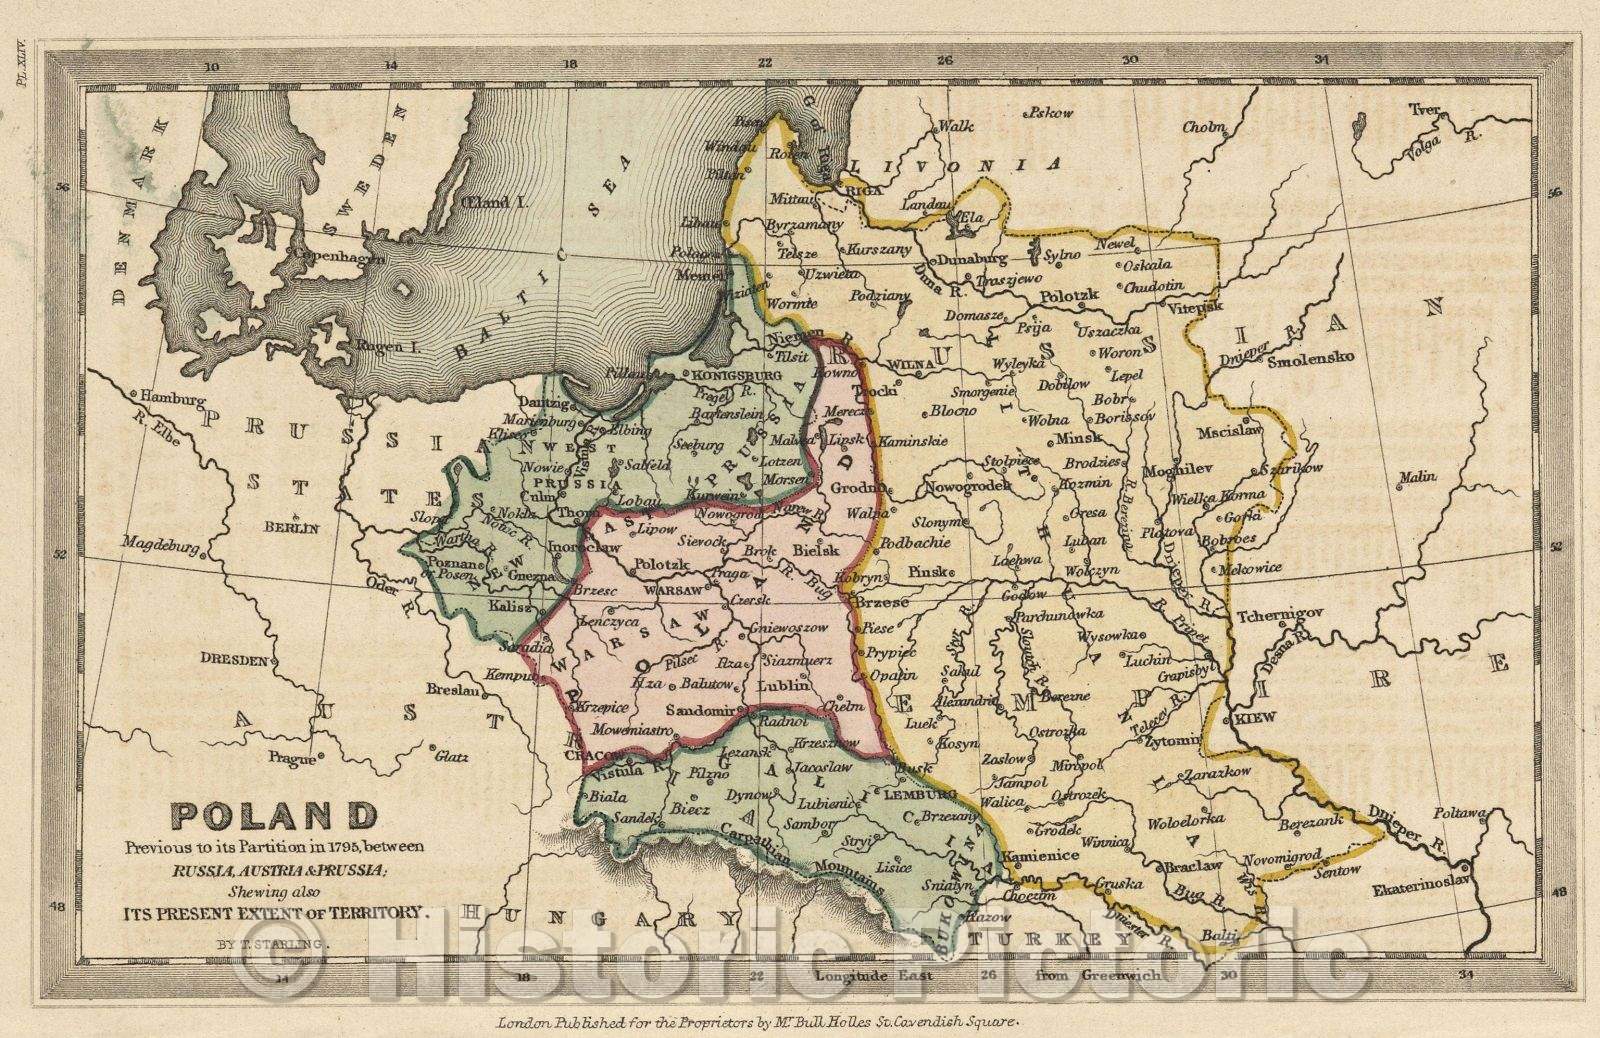 Historic Map : Poland previous to its Partition in 1795 between Russia, Austria and Prussia Shewing also its present extent of its territory., c. 1830 , Vintage Wall Art